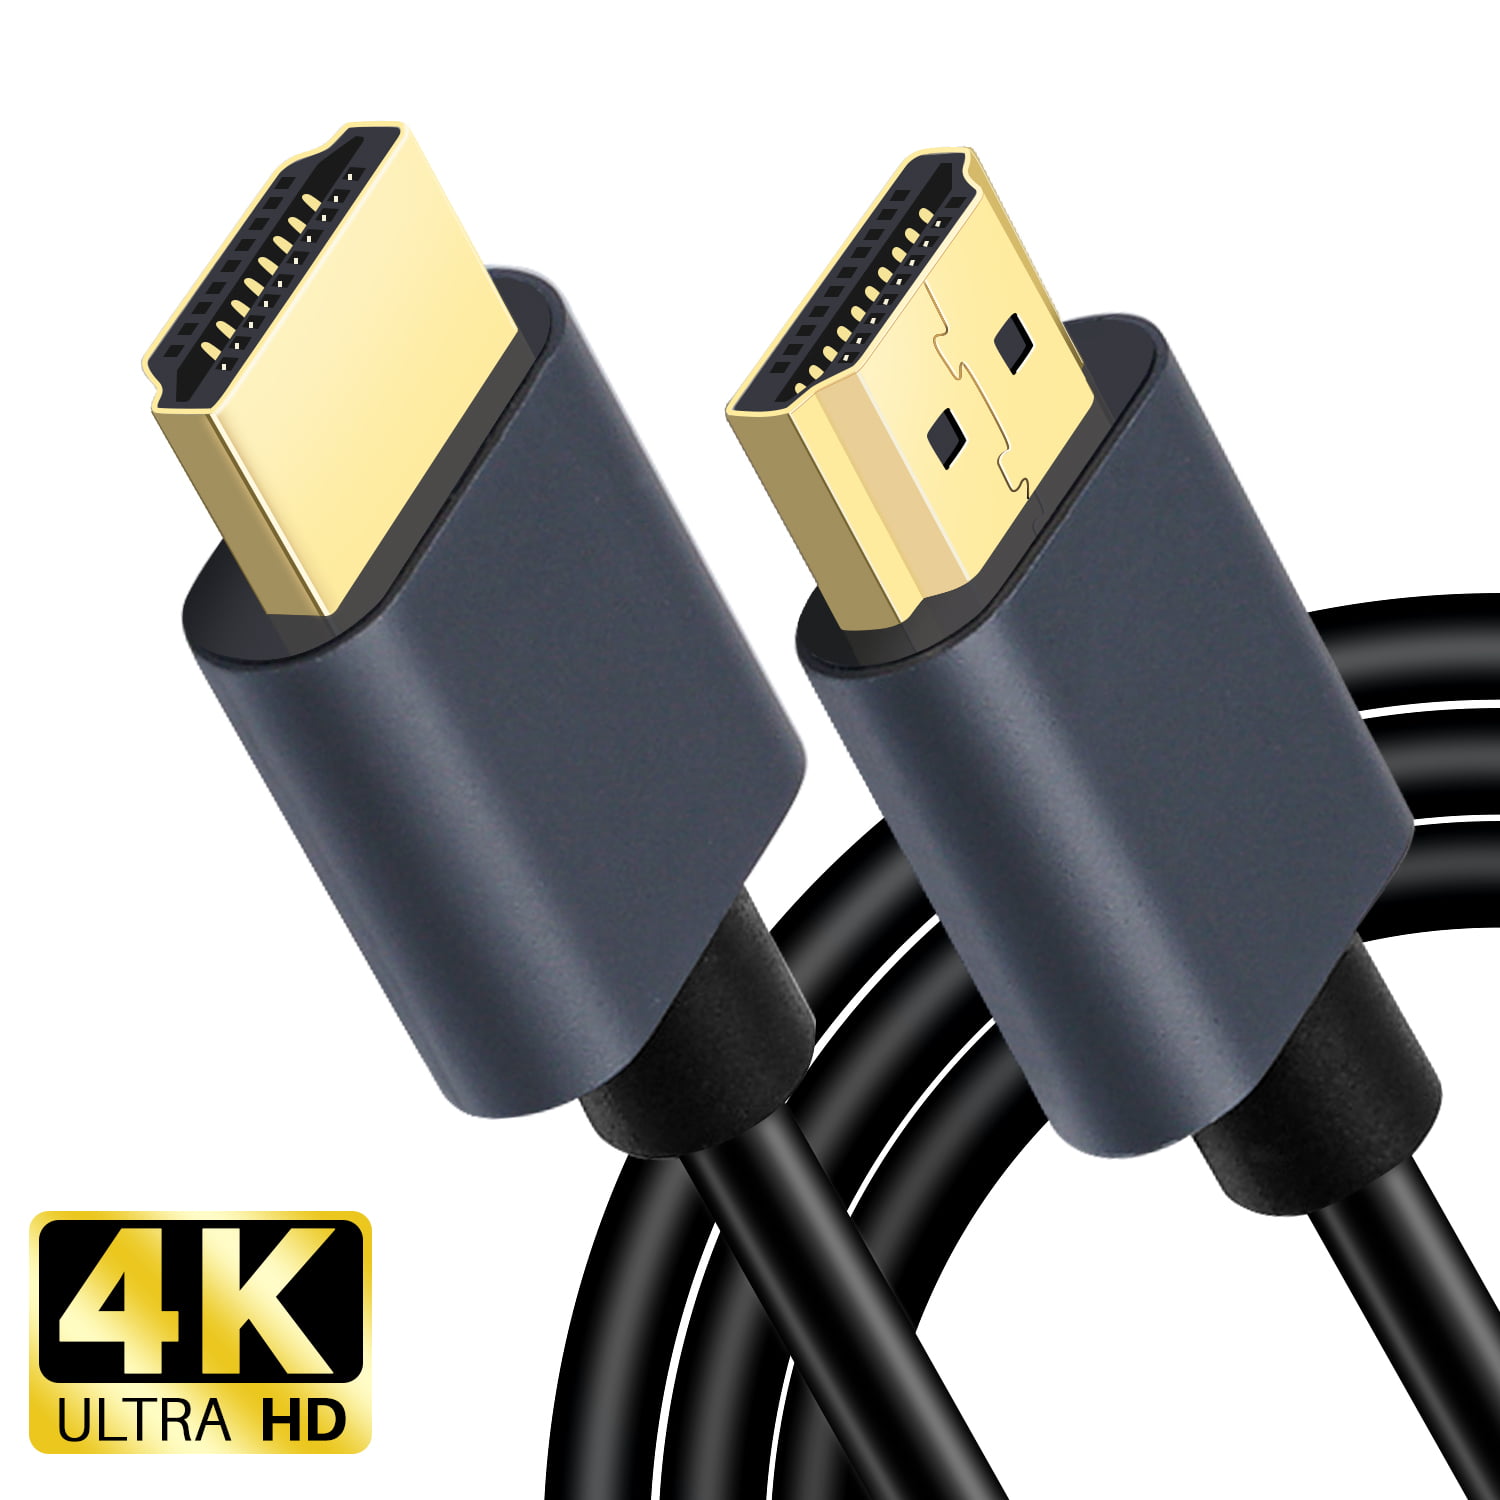 6.6FT HDMI to HDMI Cable Cord for TV, 4K, TV Video Cable Support 1080p